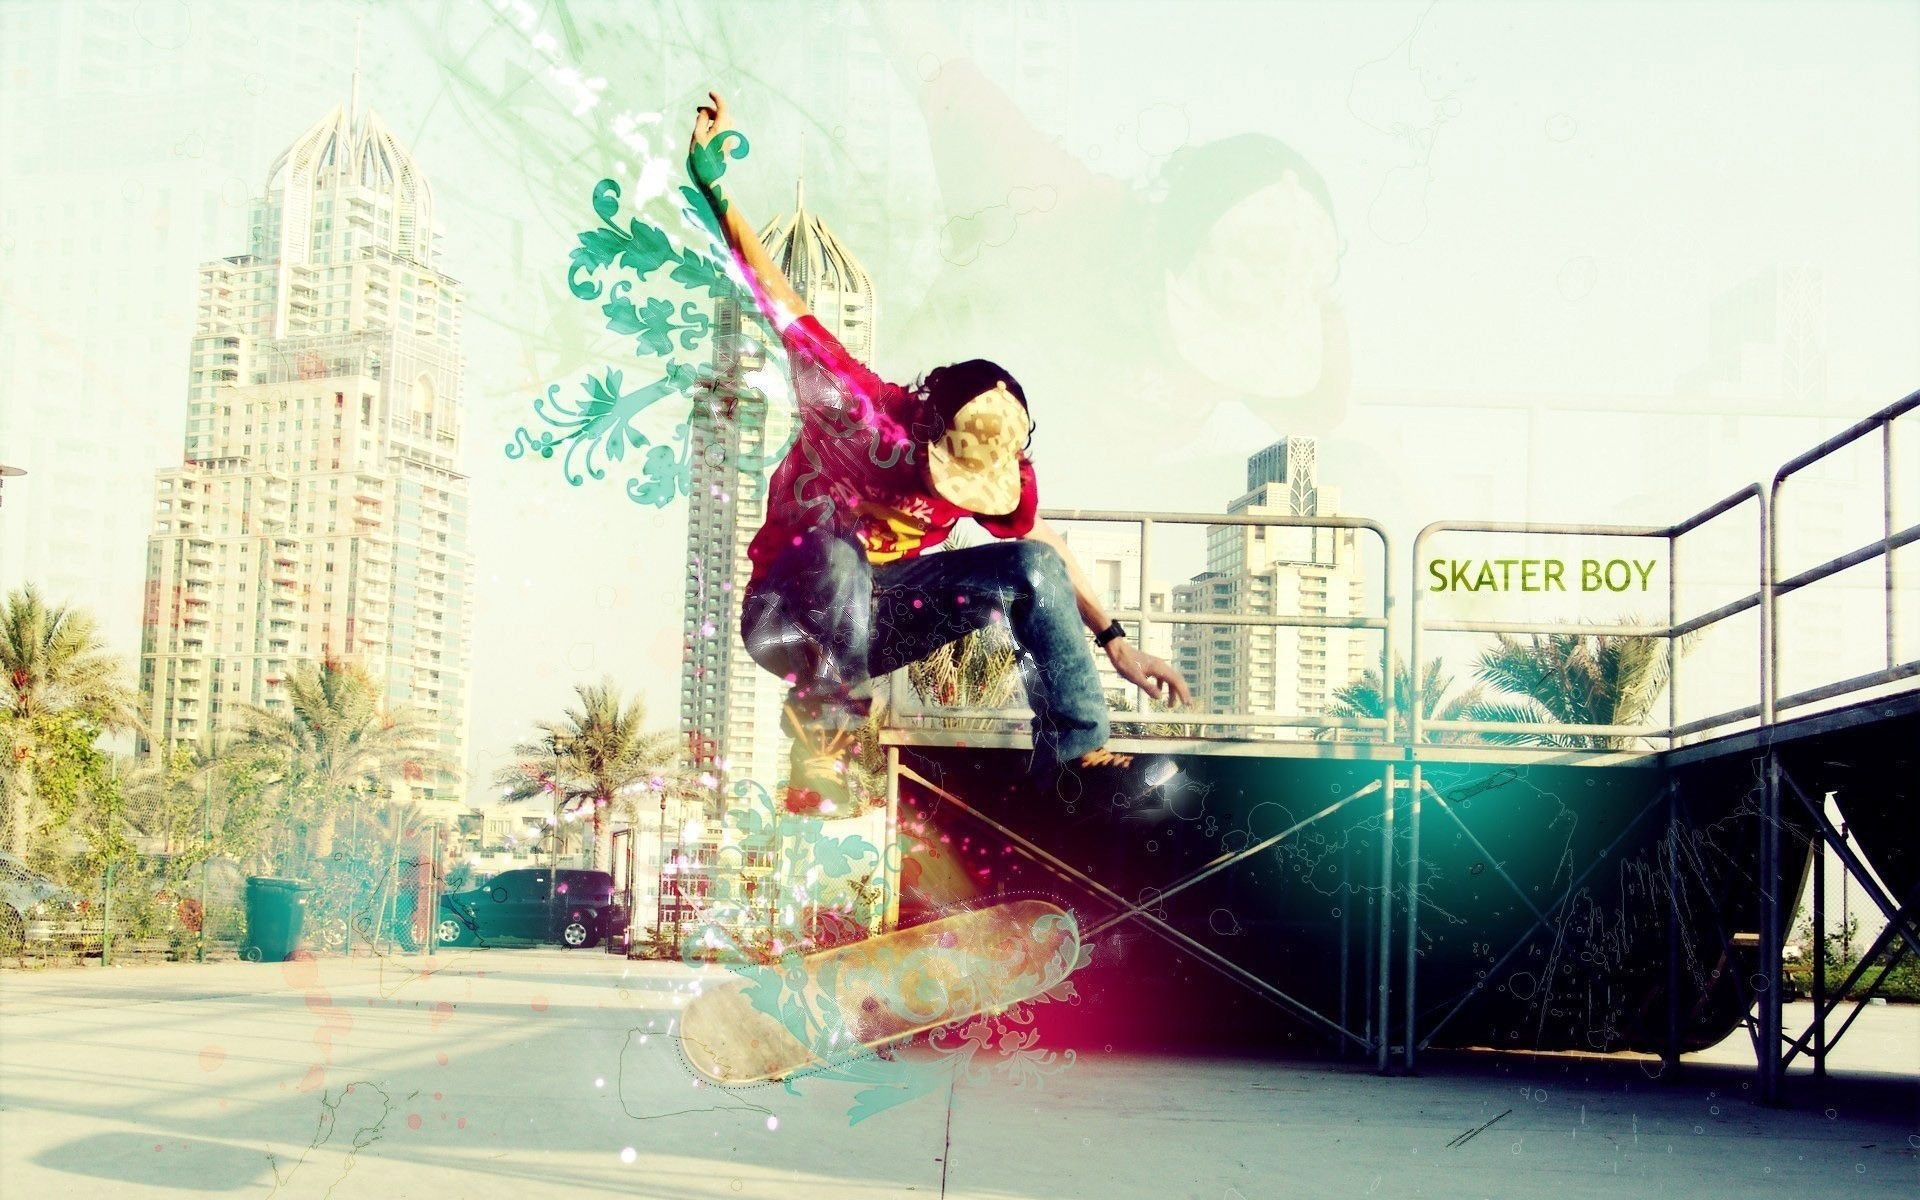 DC Wallpaper Skate, Best DC Skate Wallpapers in High Quality, DC 19201200